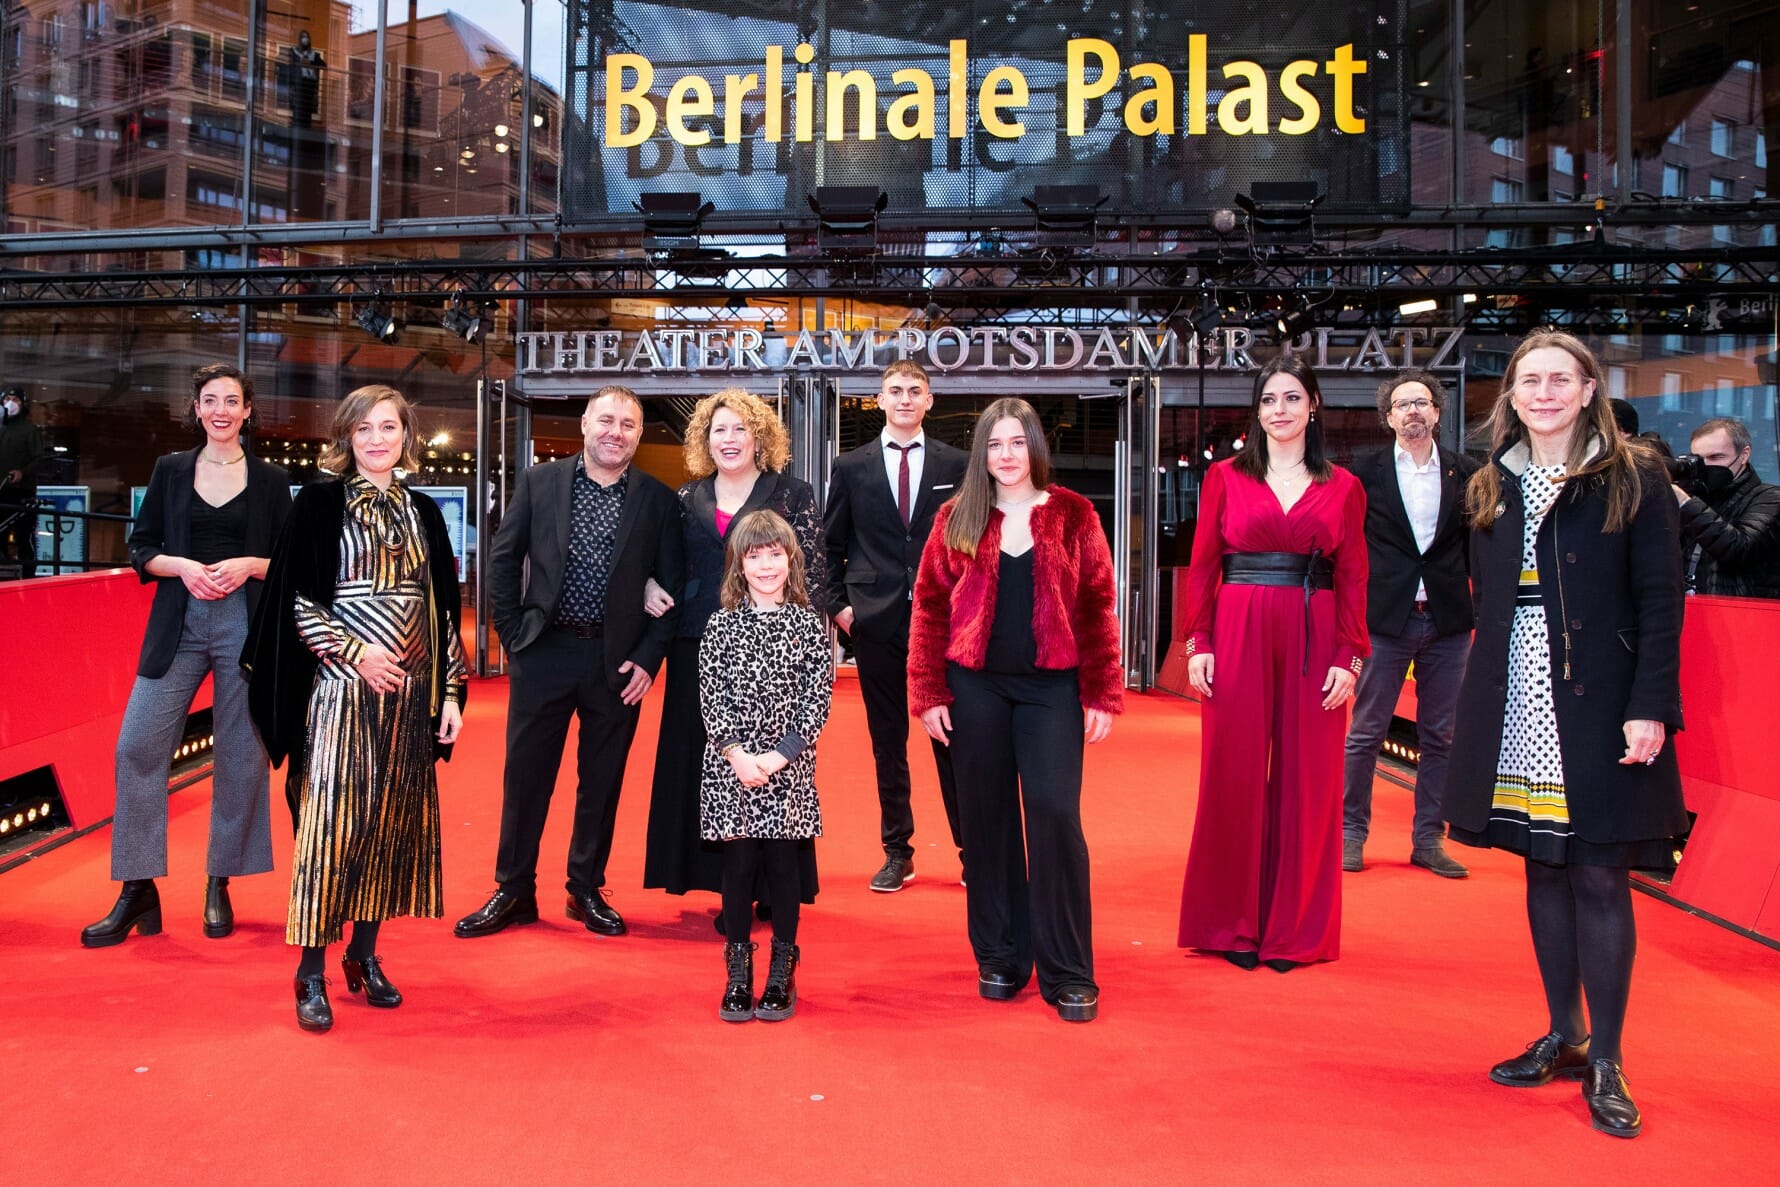 The film team, the Artistic Director and the Executive Director of the Berlin International Film Festival on the Red Carpet before the premiere. Image courtesy of Berlinale.